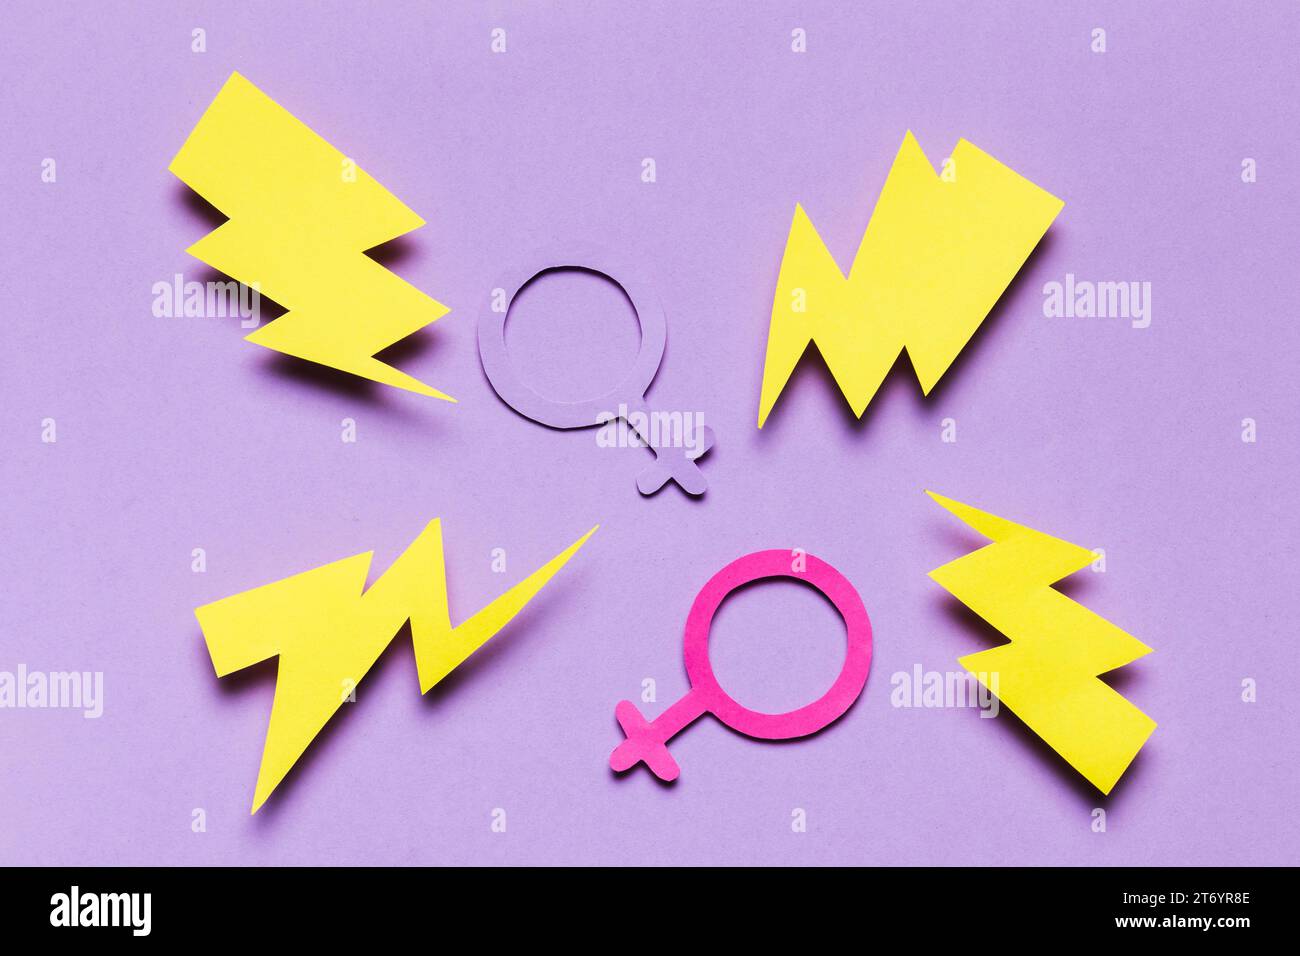 Feminine masculine gender signs surrounded by thunders Stock Photo